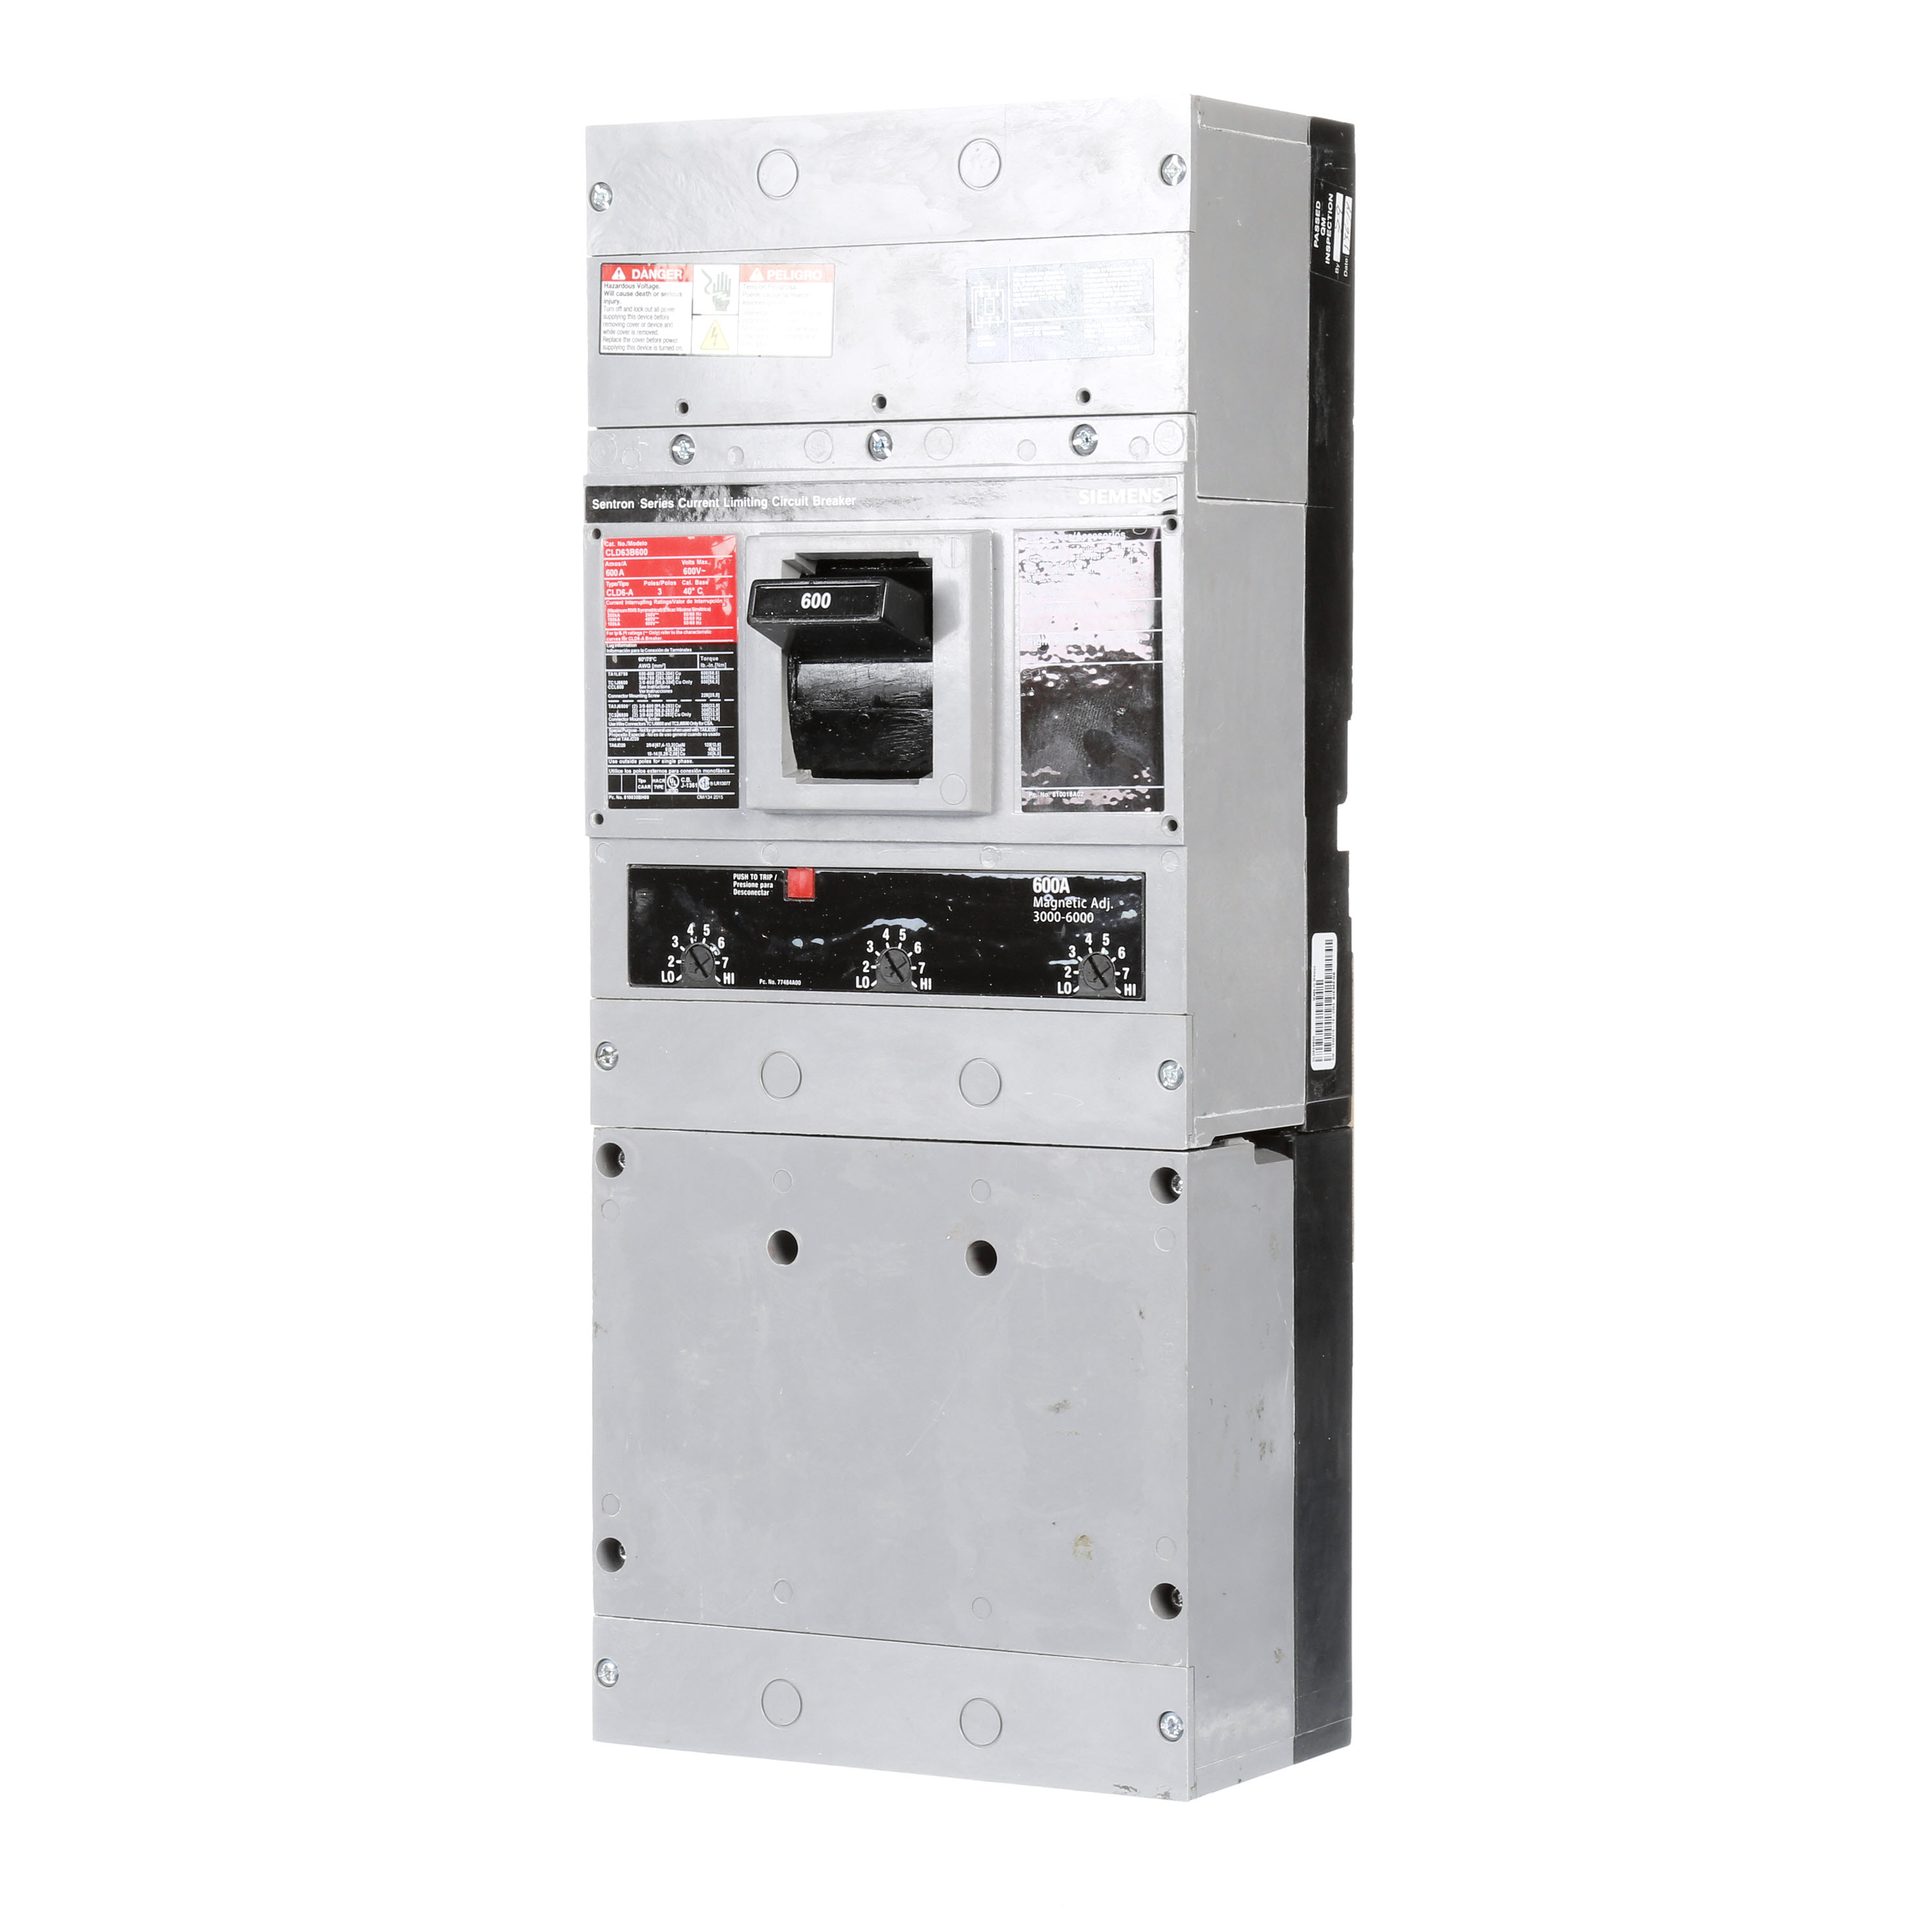 SIEMENS LOW VOLTAGE SENTRON MOLDED CASE CIRCUIT BREAKER WITH THERMAL - MAGNETICTRIP UNIT. ASSEMBLED STANDARD 40 DEG C BREAKER LD FRAME WITH FUSELESS CURRENT LIMITING BREAKING CAPACITY. 600A 3-POLE (100KAIC AT 600V) (150KAIC AT 480V). NON-INTERCHANGEABLE TRIP UNIT. SPECIAL FEATURES NO LUGS INSTALLED. DIMENSIONS (W x Hx D) IN 7.50 x 17.9 x 4.00.